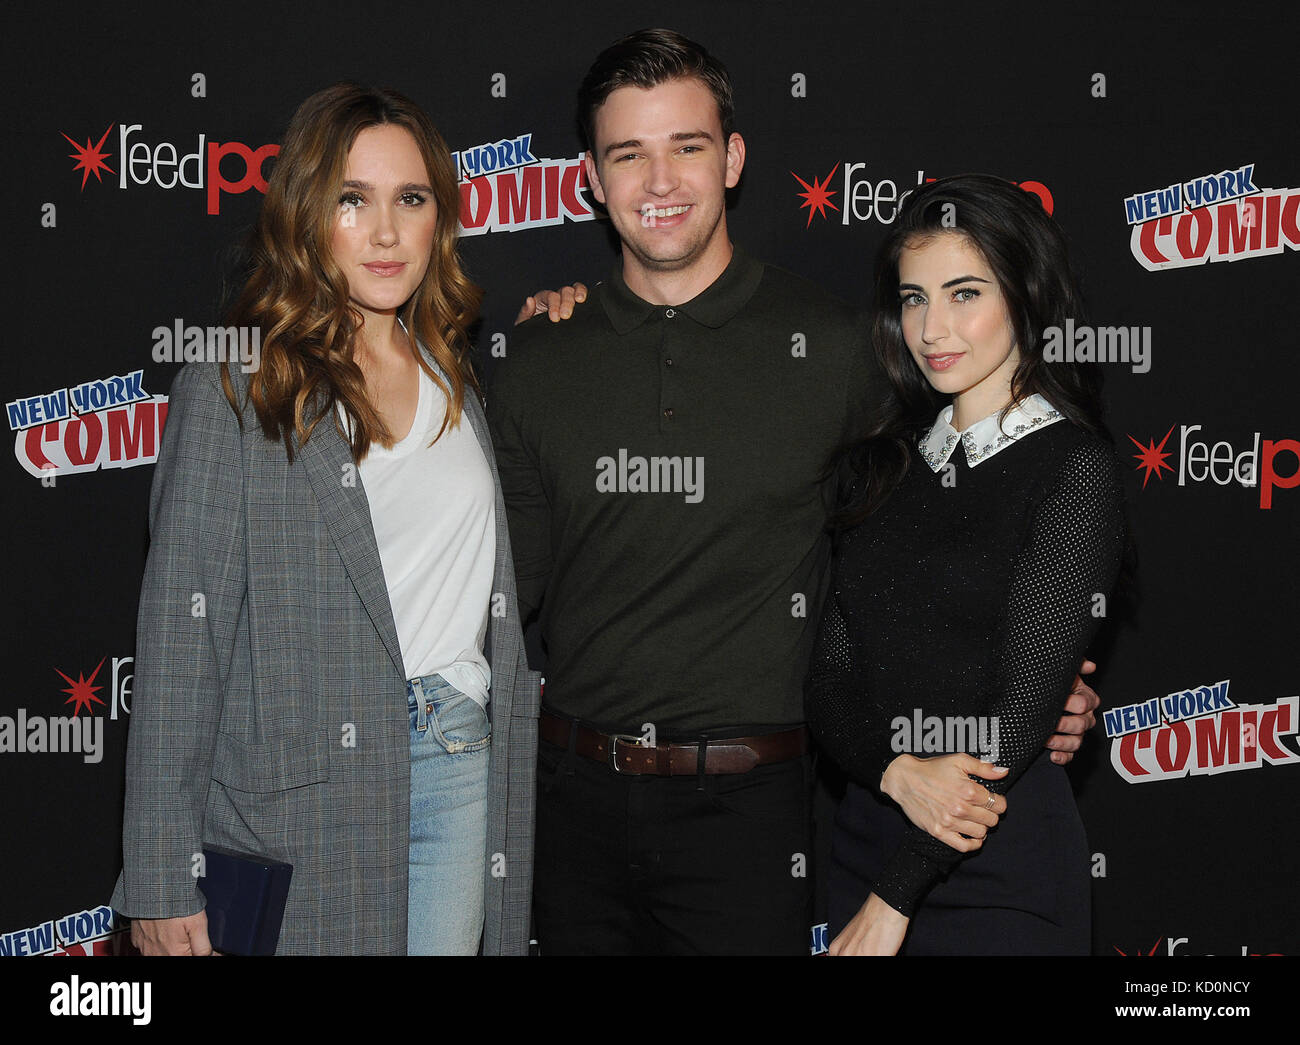 New York, NY, USA. 07th Oct, 2017. Eden Brolin, Burkely Duffield and Dilan Gwyn attends the press day for Freeform show "Beyond" at New York at the Theater at Madison Square